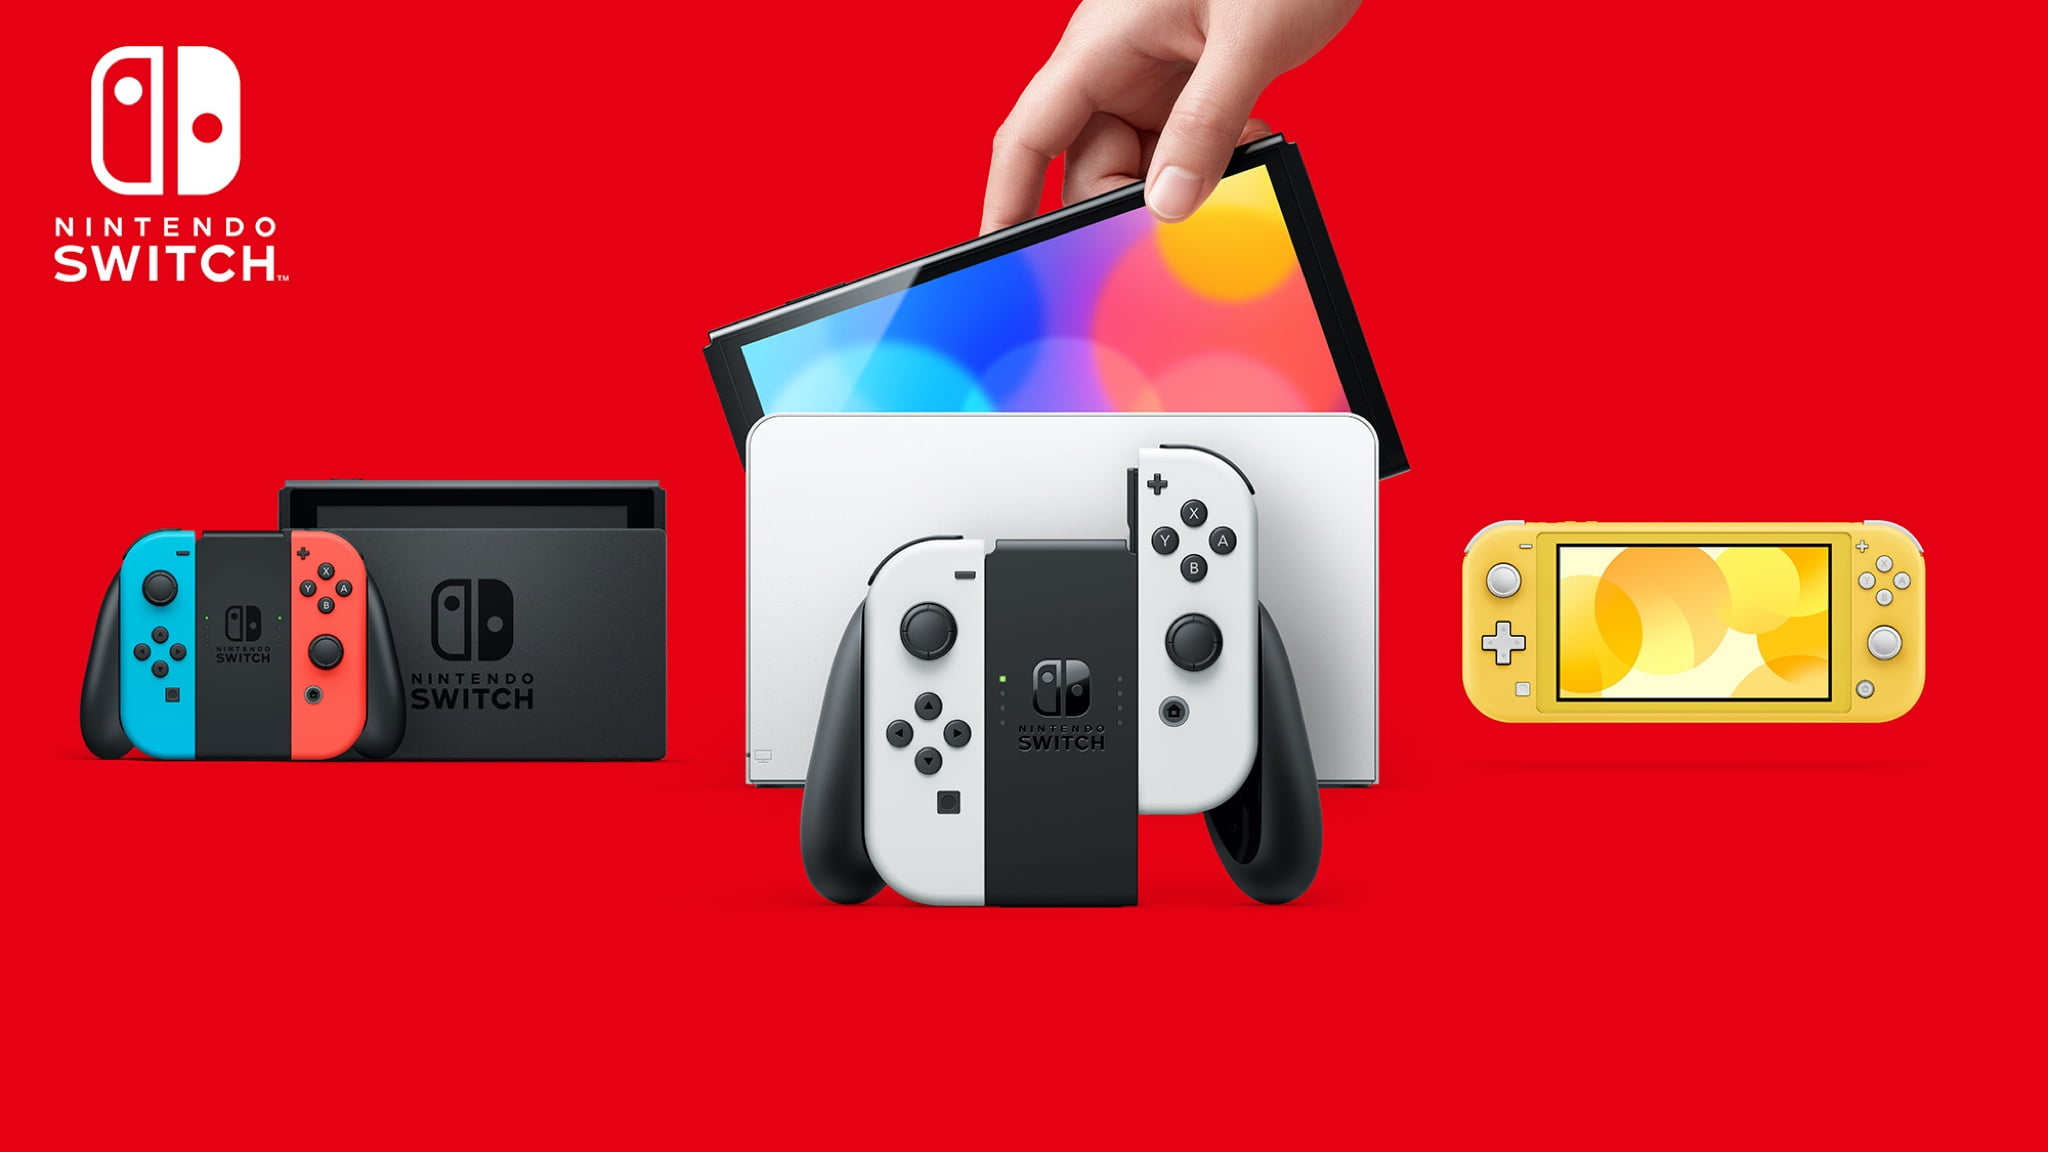 Nintendo Sales launches an extended warranty service for Nintendo Switch in Japan